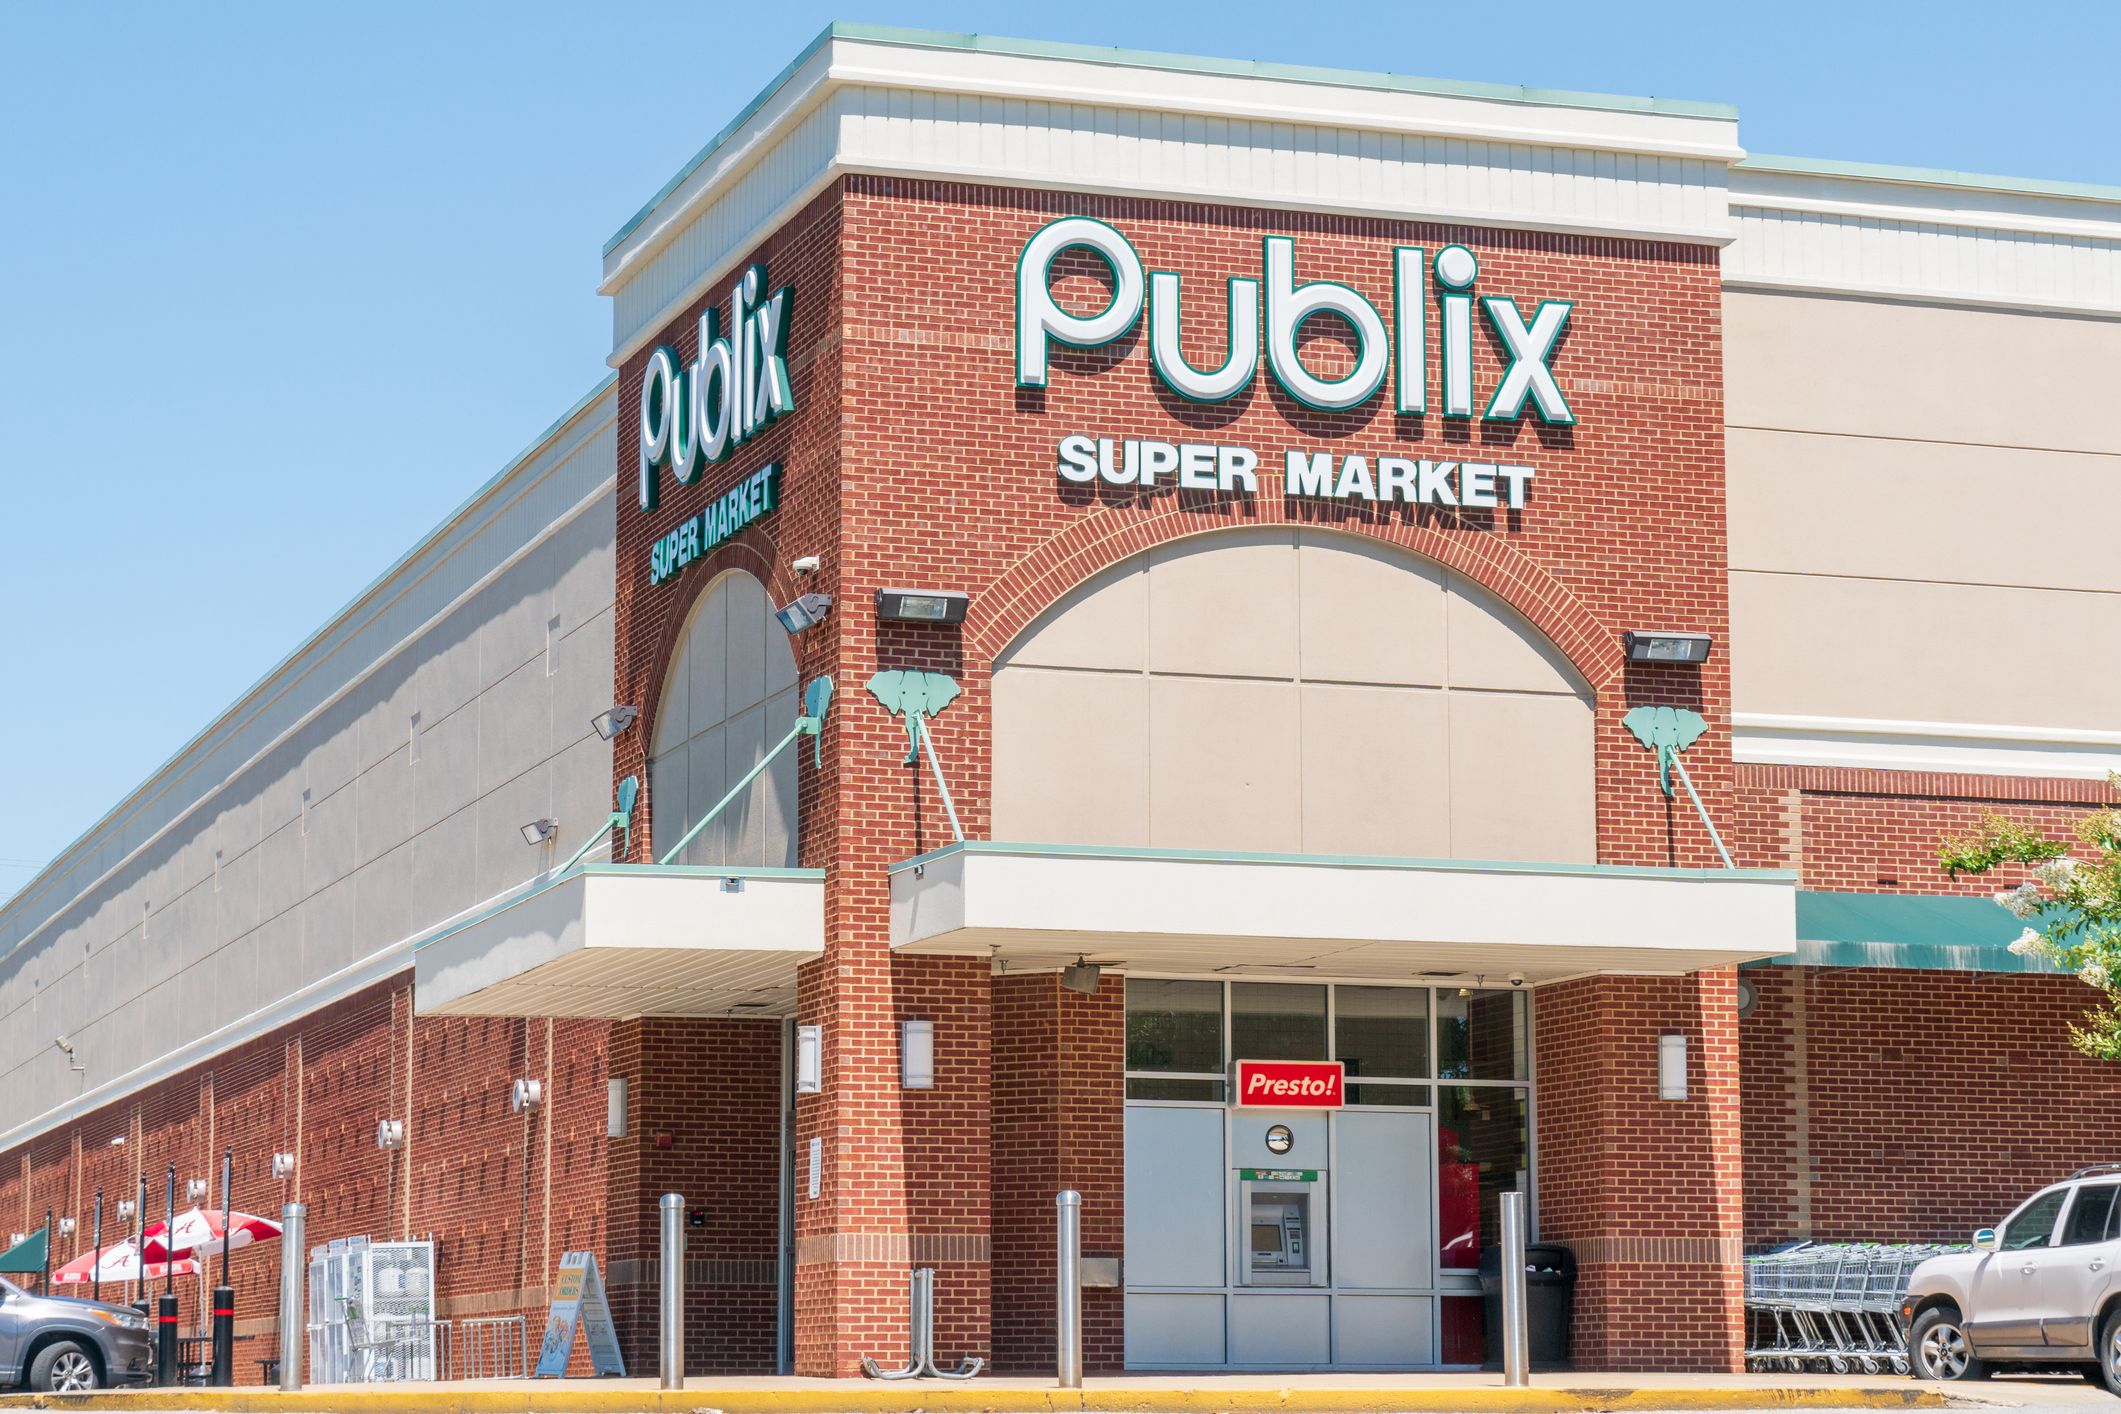 Is Publix Open On Christmas Day In 2020 Publix Christmas Hours 2020